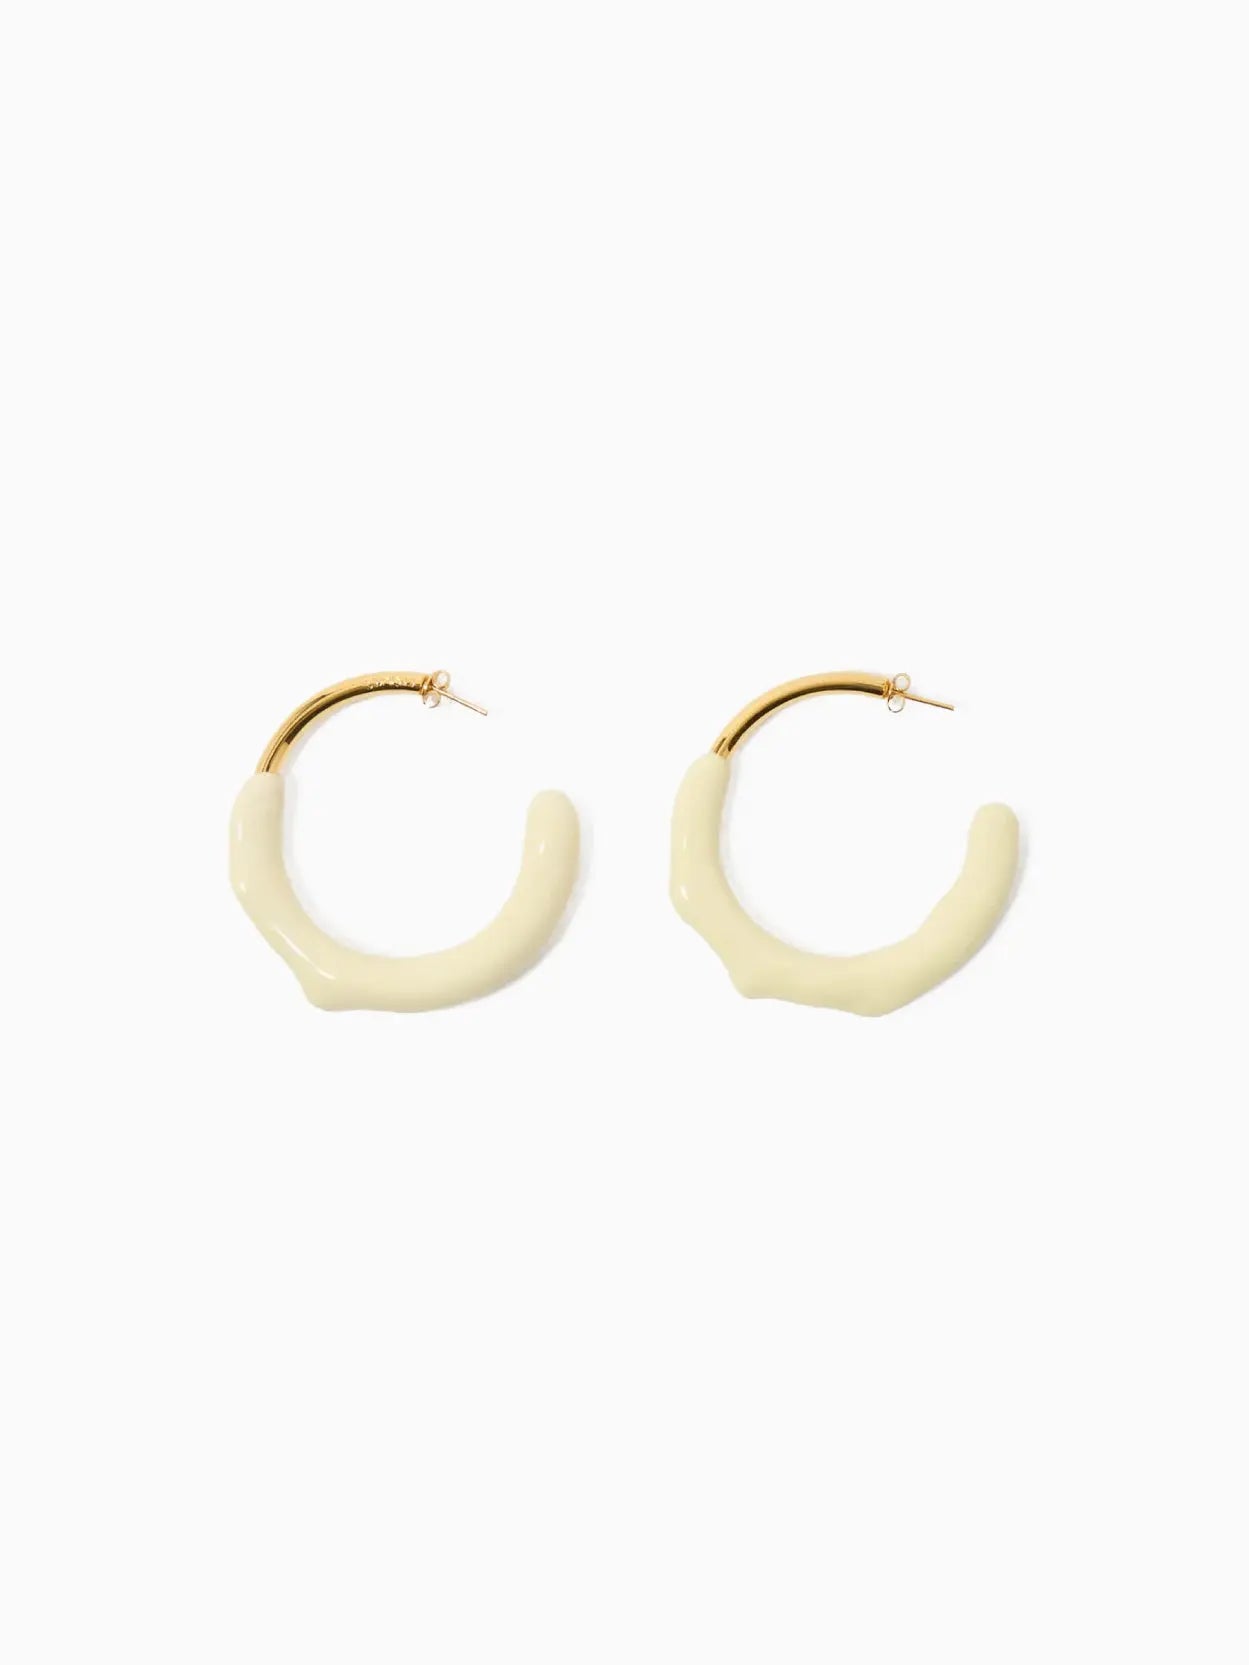 Discover a pair of Sunnei Rubberized Hoop Earrings featuring partial hoops with gold-toned metal at the top, transitioning into a wavy, cream-colored lower half. Available exclusively at Bassalstore in Barcelona, this design combines smooth metallic texture with an organic, uneven shape for a unique look.